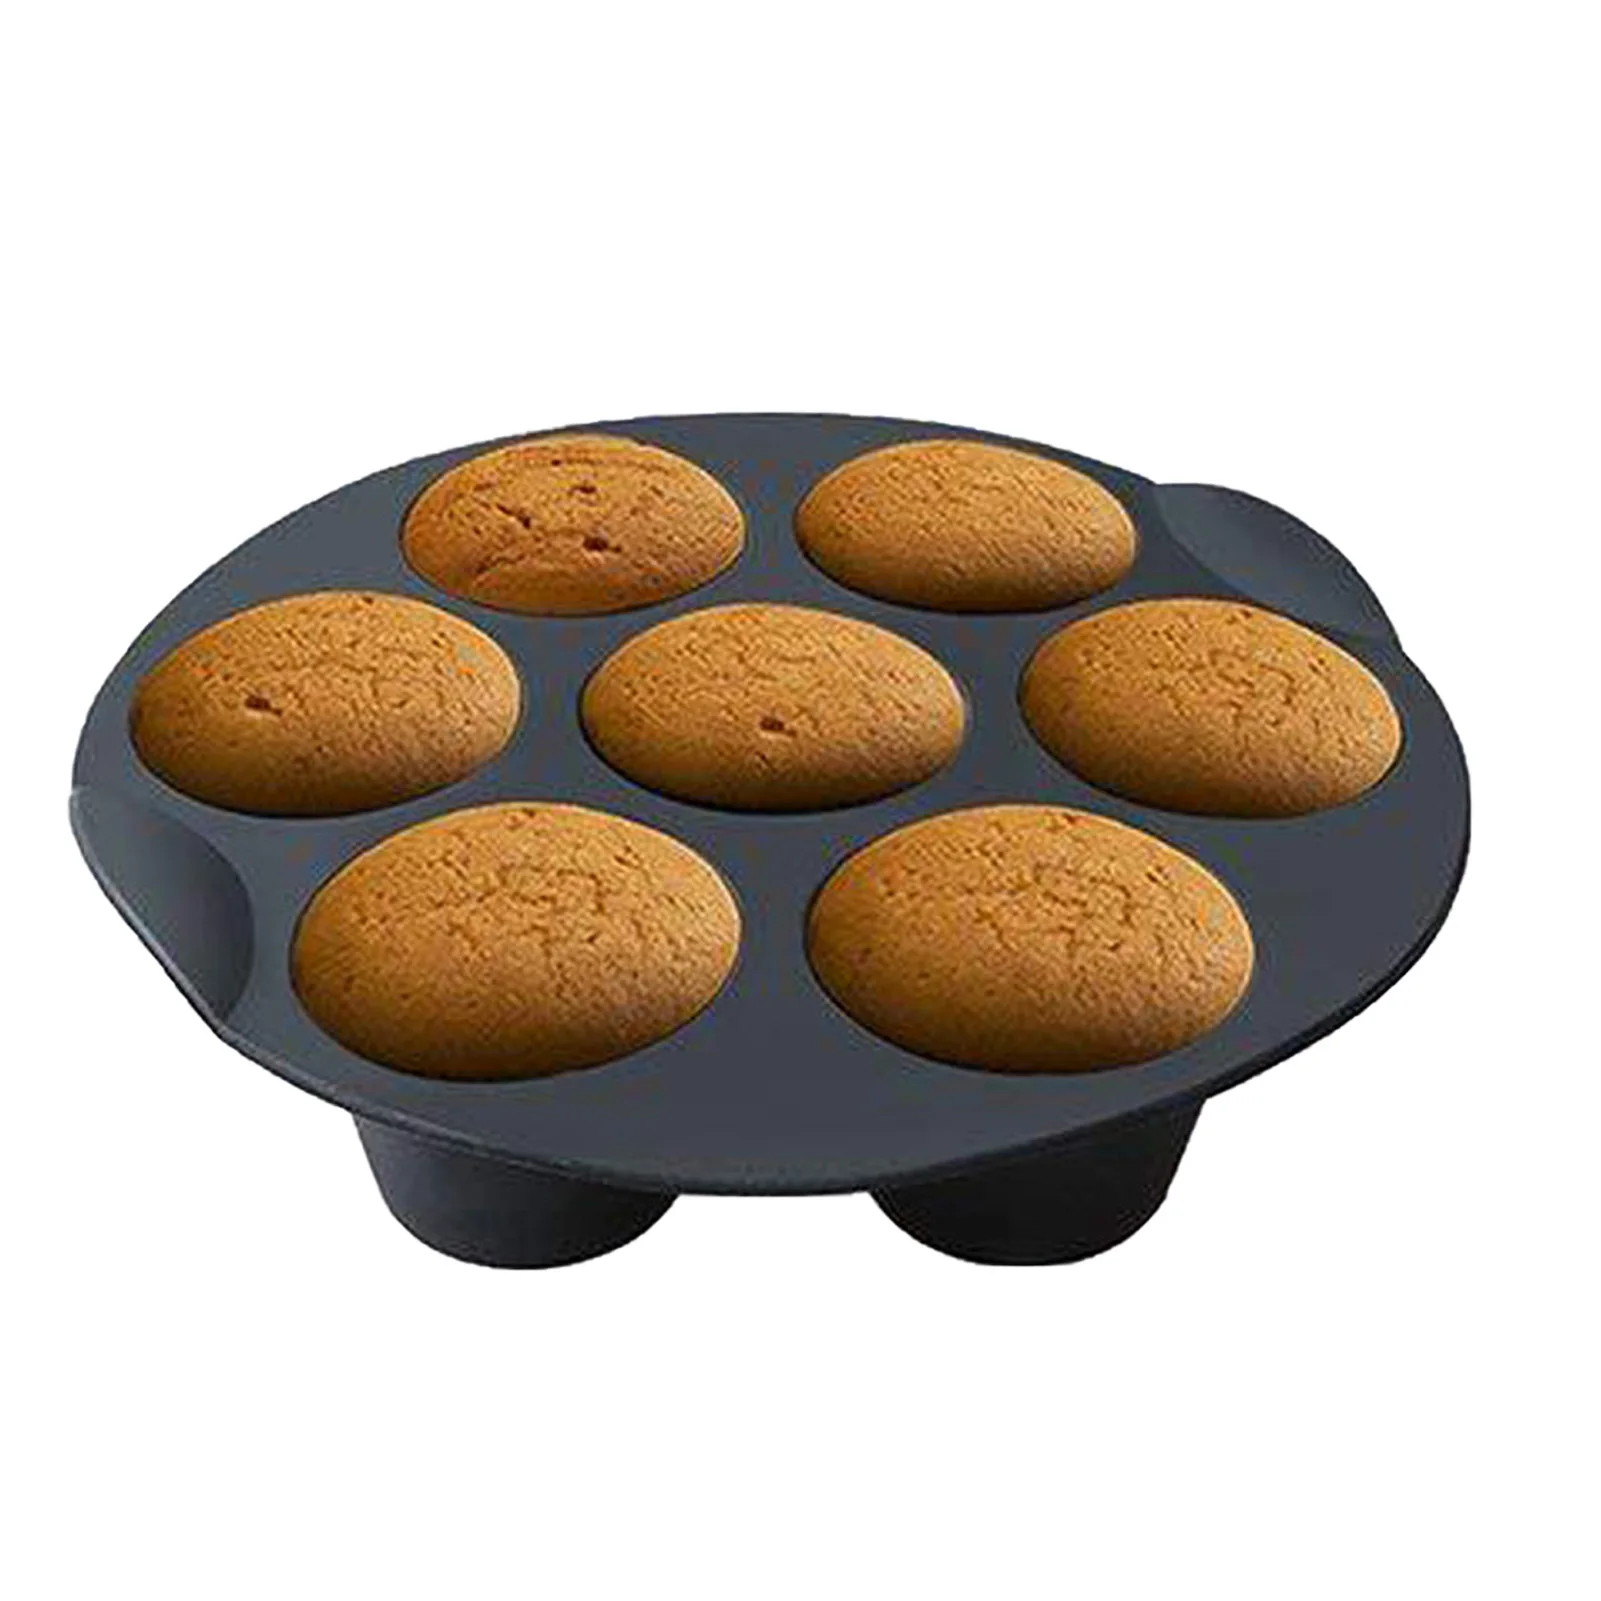 

Air Fryer Accessories 7 Even Cake Cup Muffin Cup For 3.5-5.8L Various Air Fryer Molds Cupcake Muffin Baking Cups Nonstick Pan